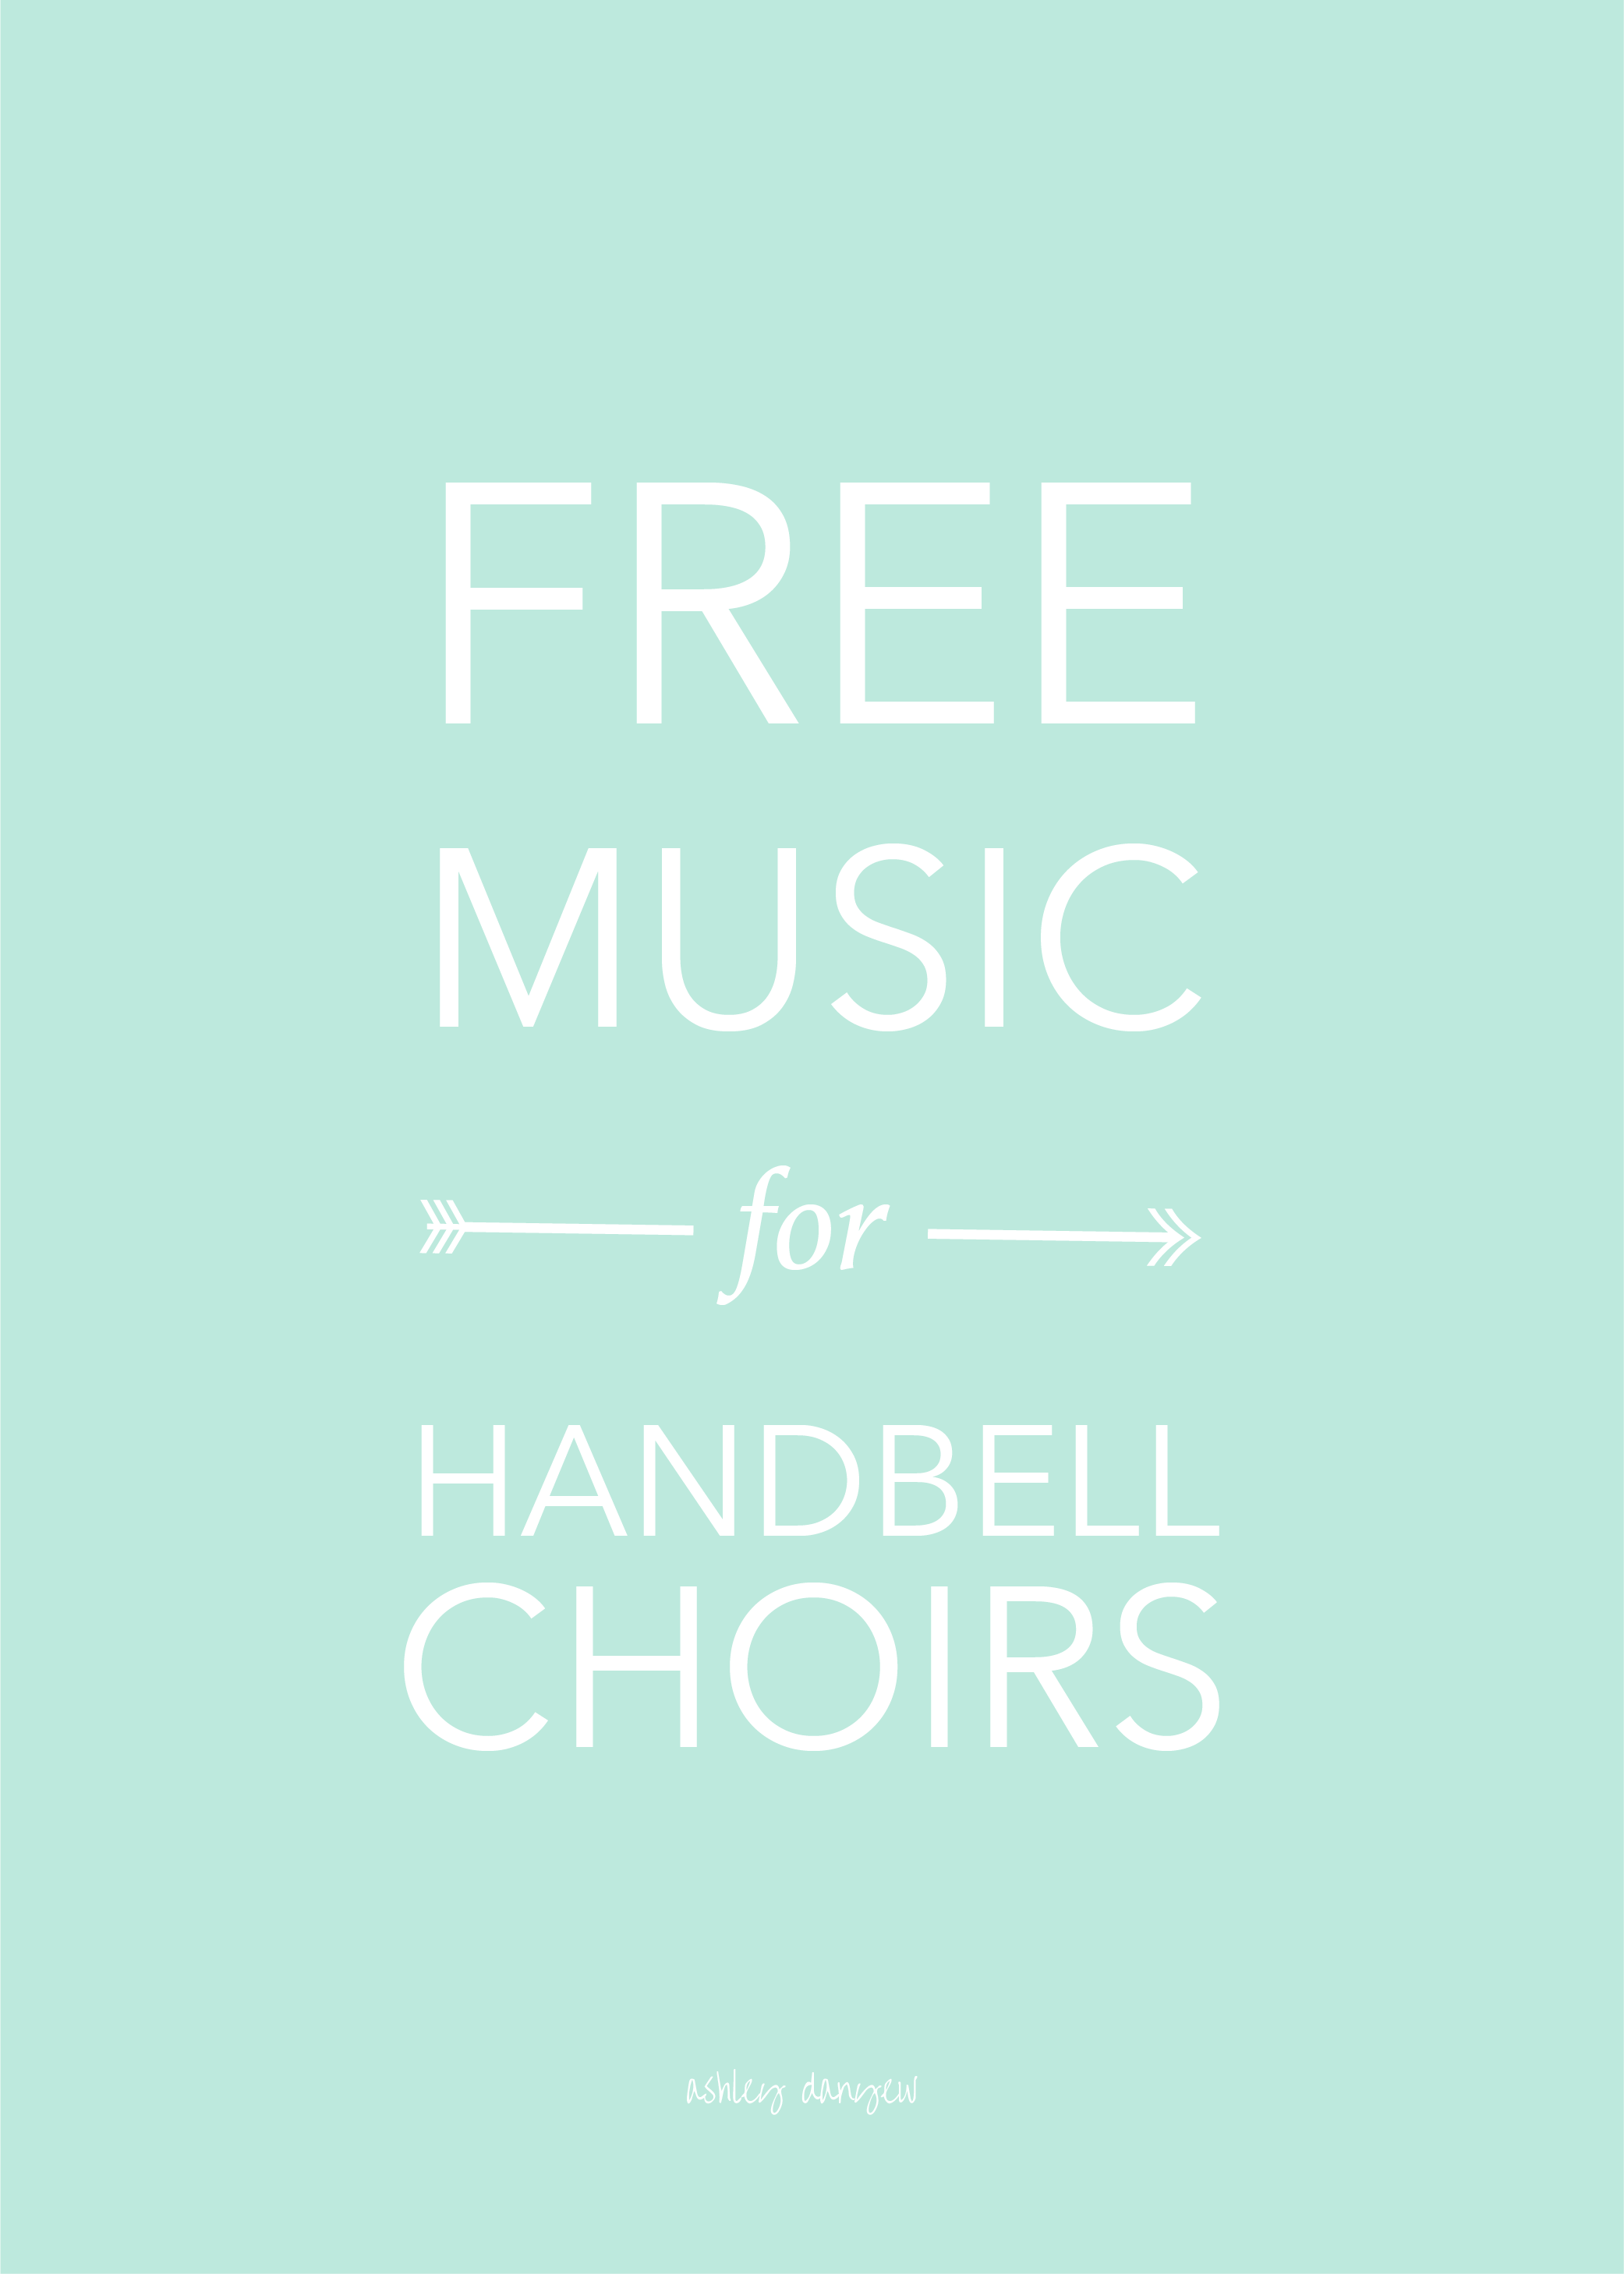 Copy of Free Music for Handbell Choirs